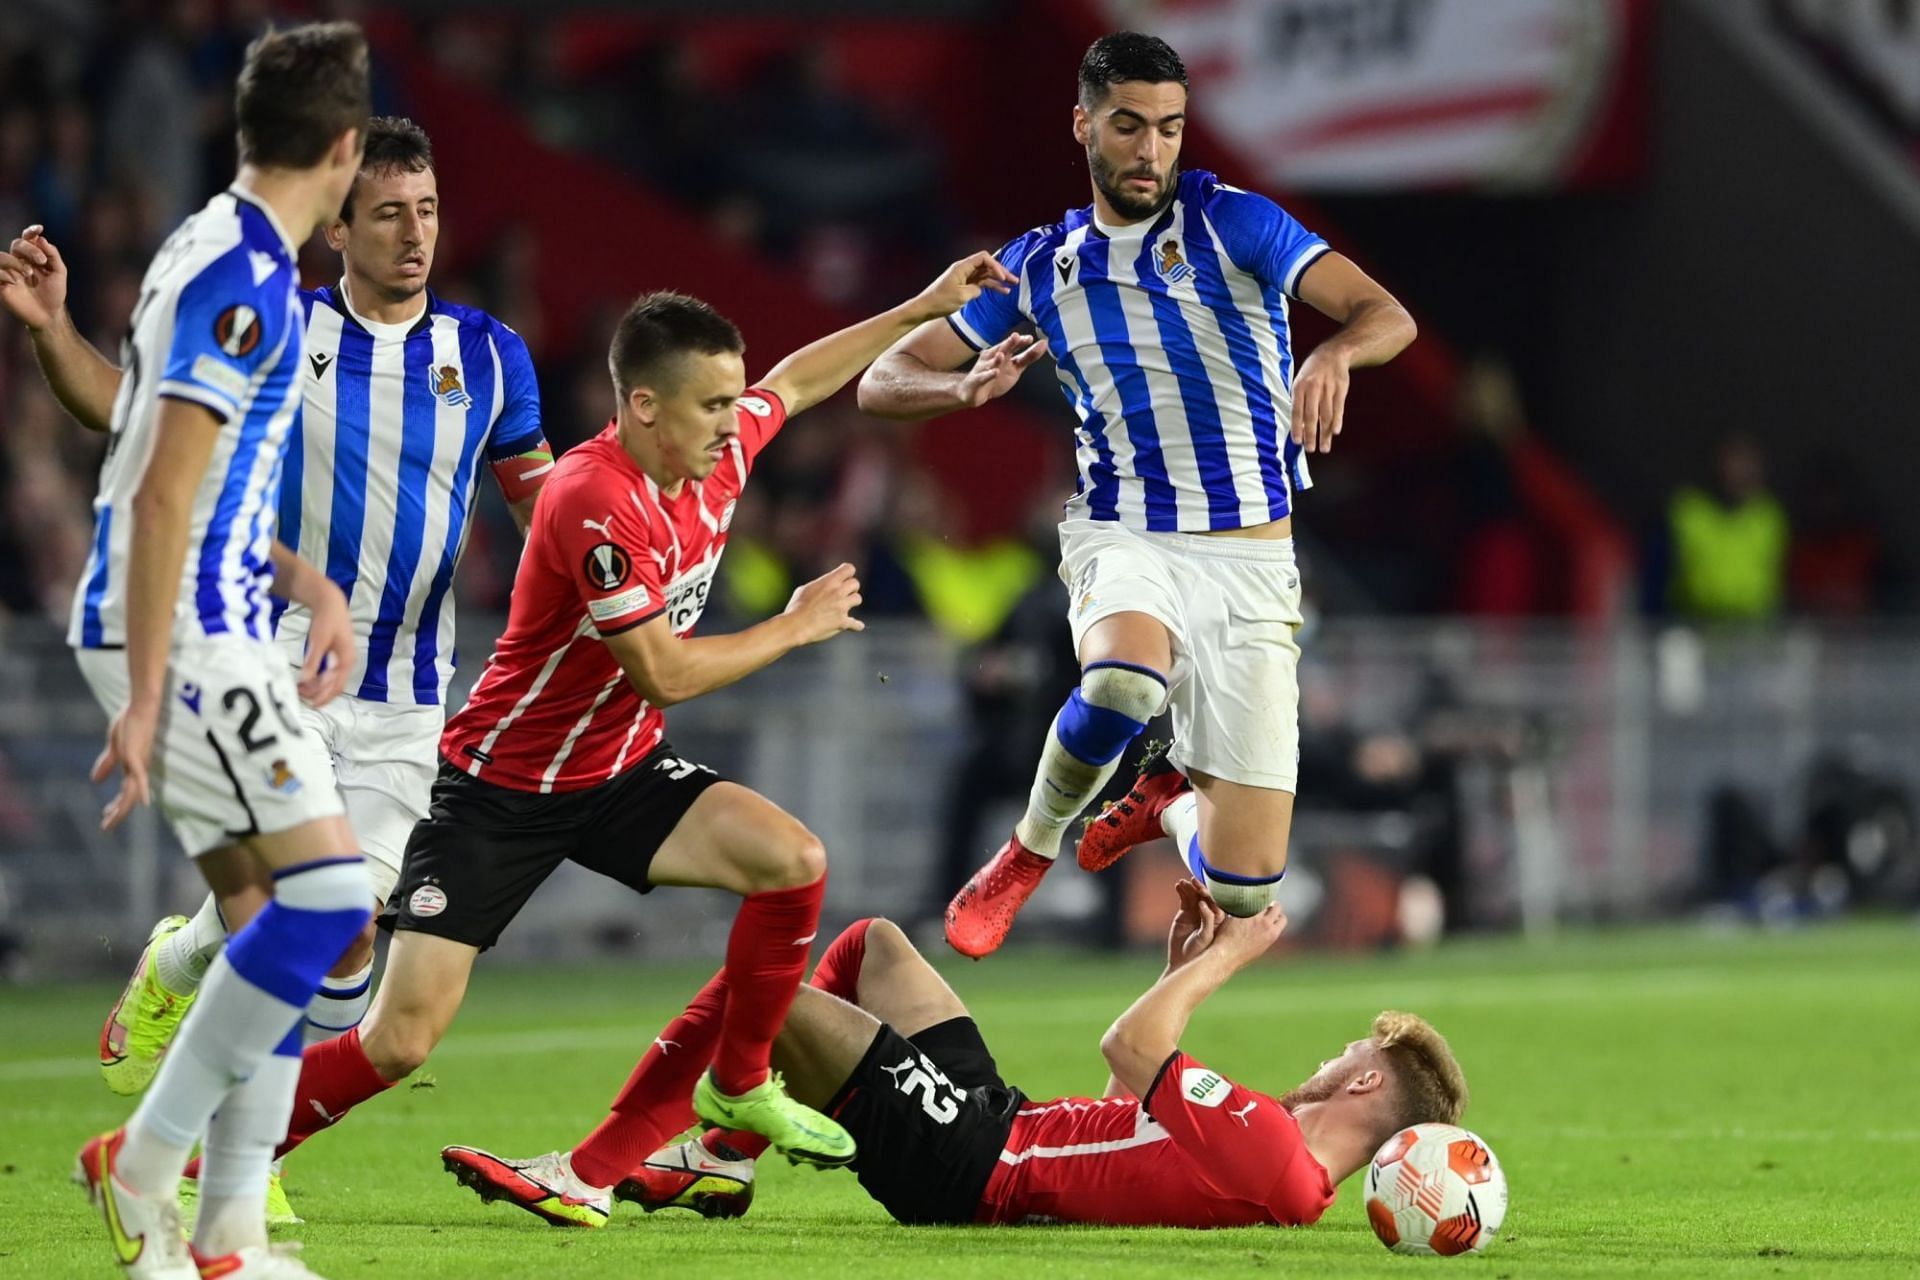 Real Sociedad and PSV go head-to-head in their final Europa League group stage fixture on Thursday